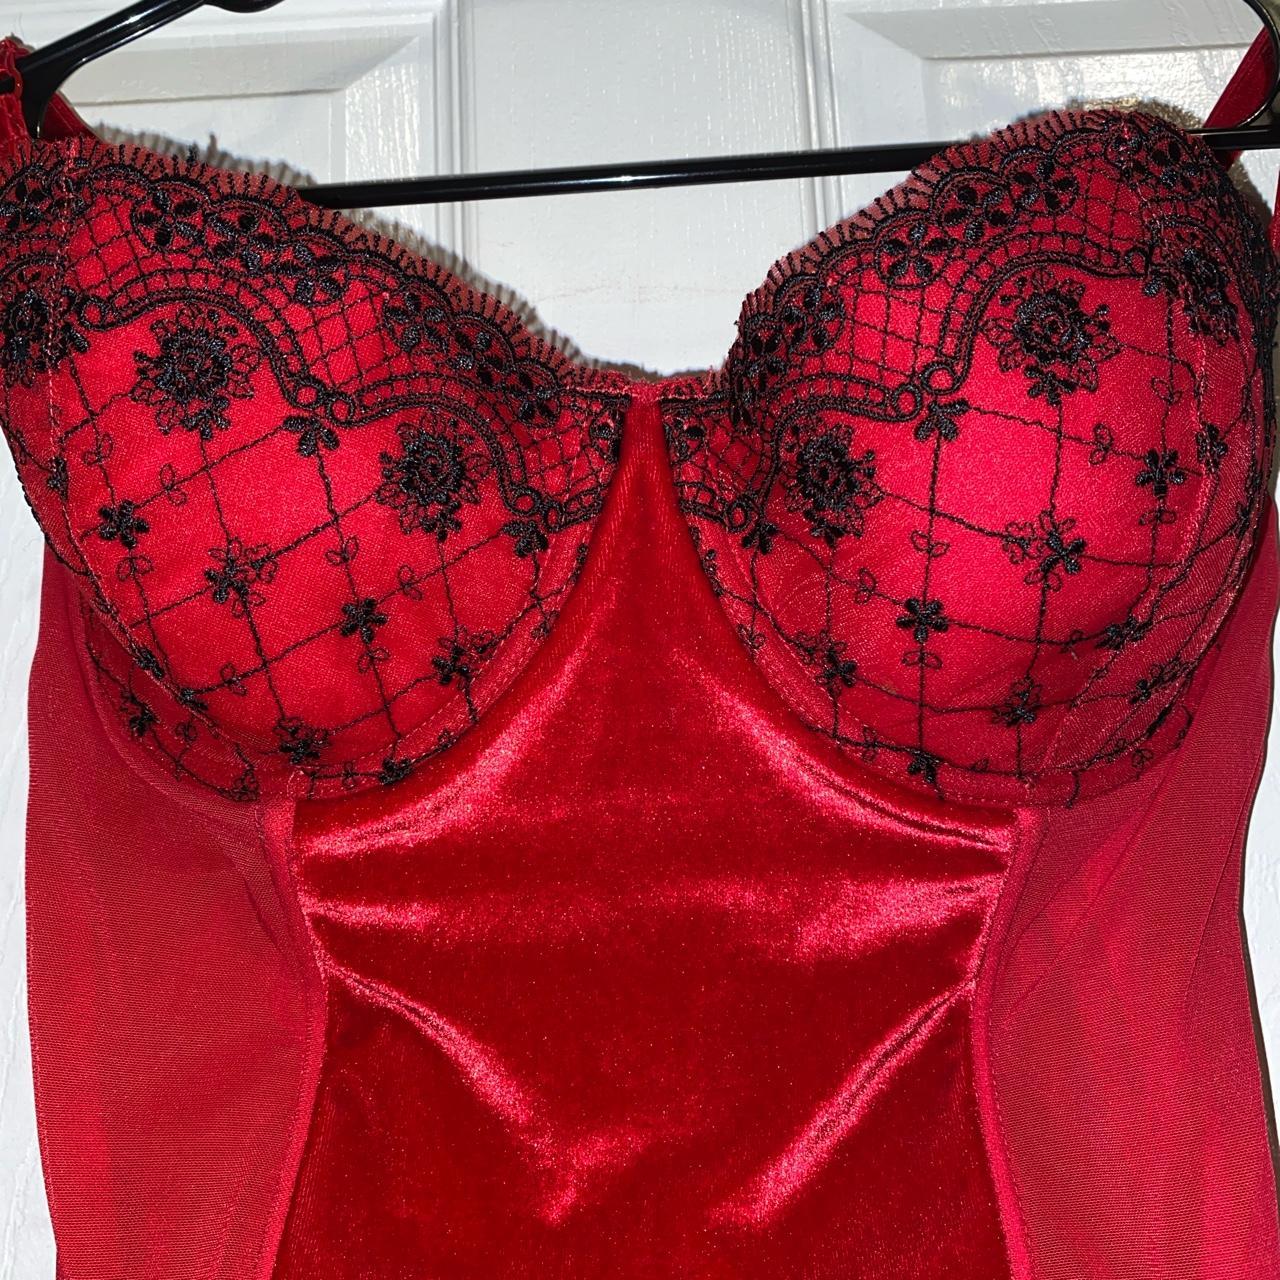 Smart and Sexy Women's Red and Black Corset (2)